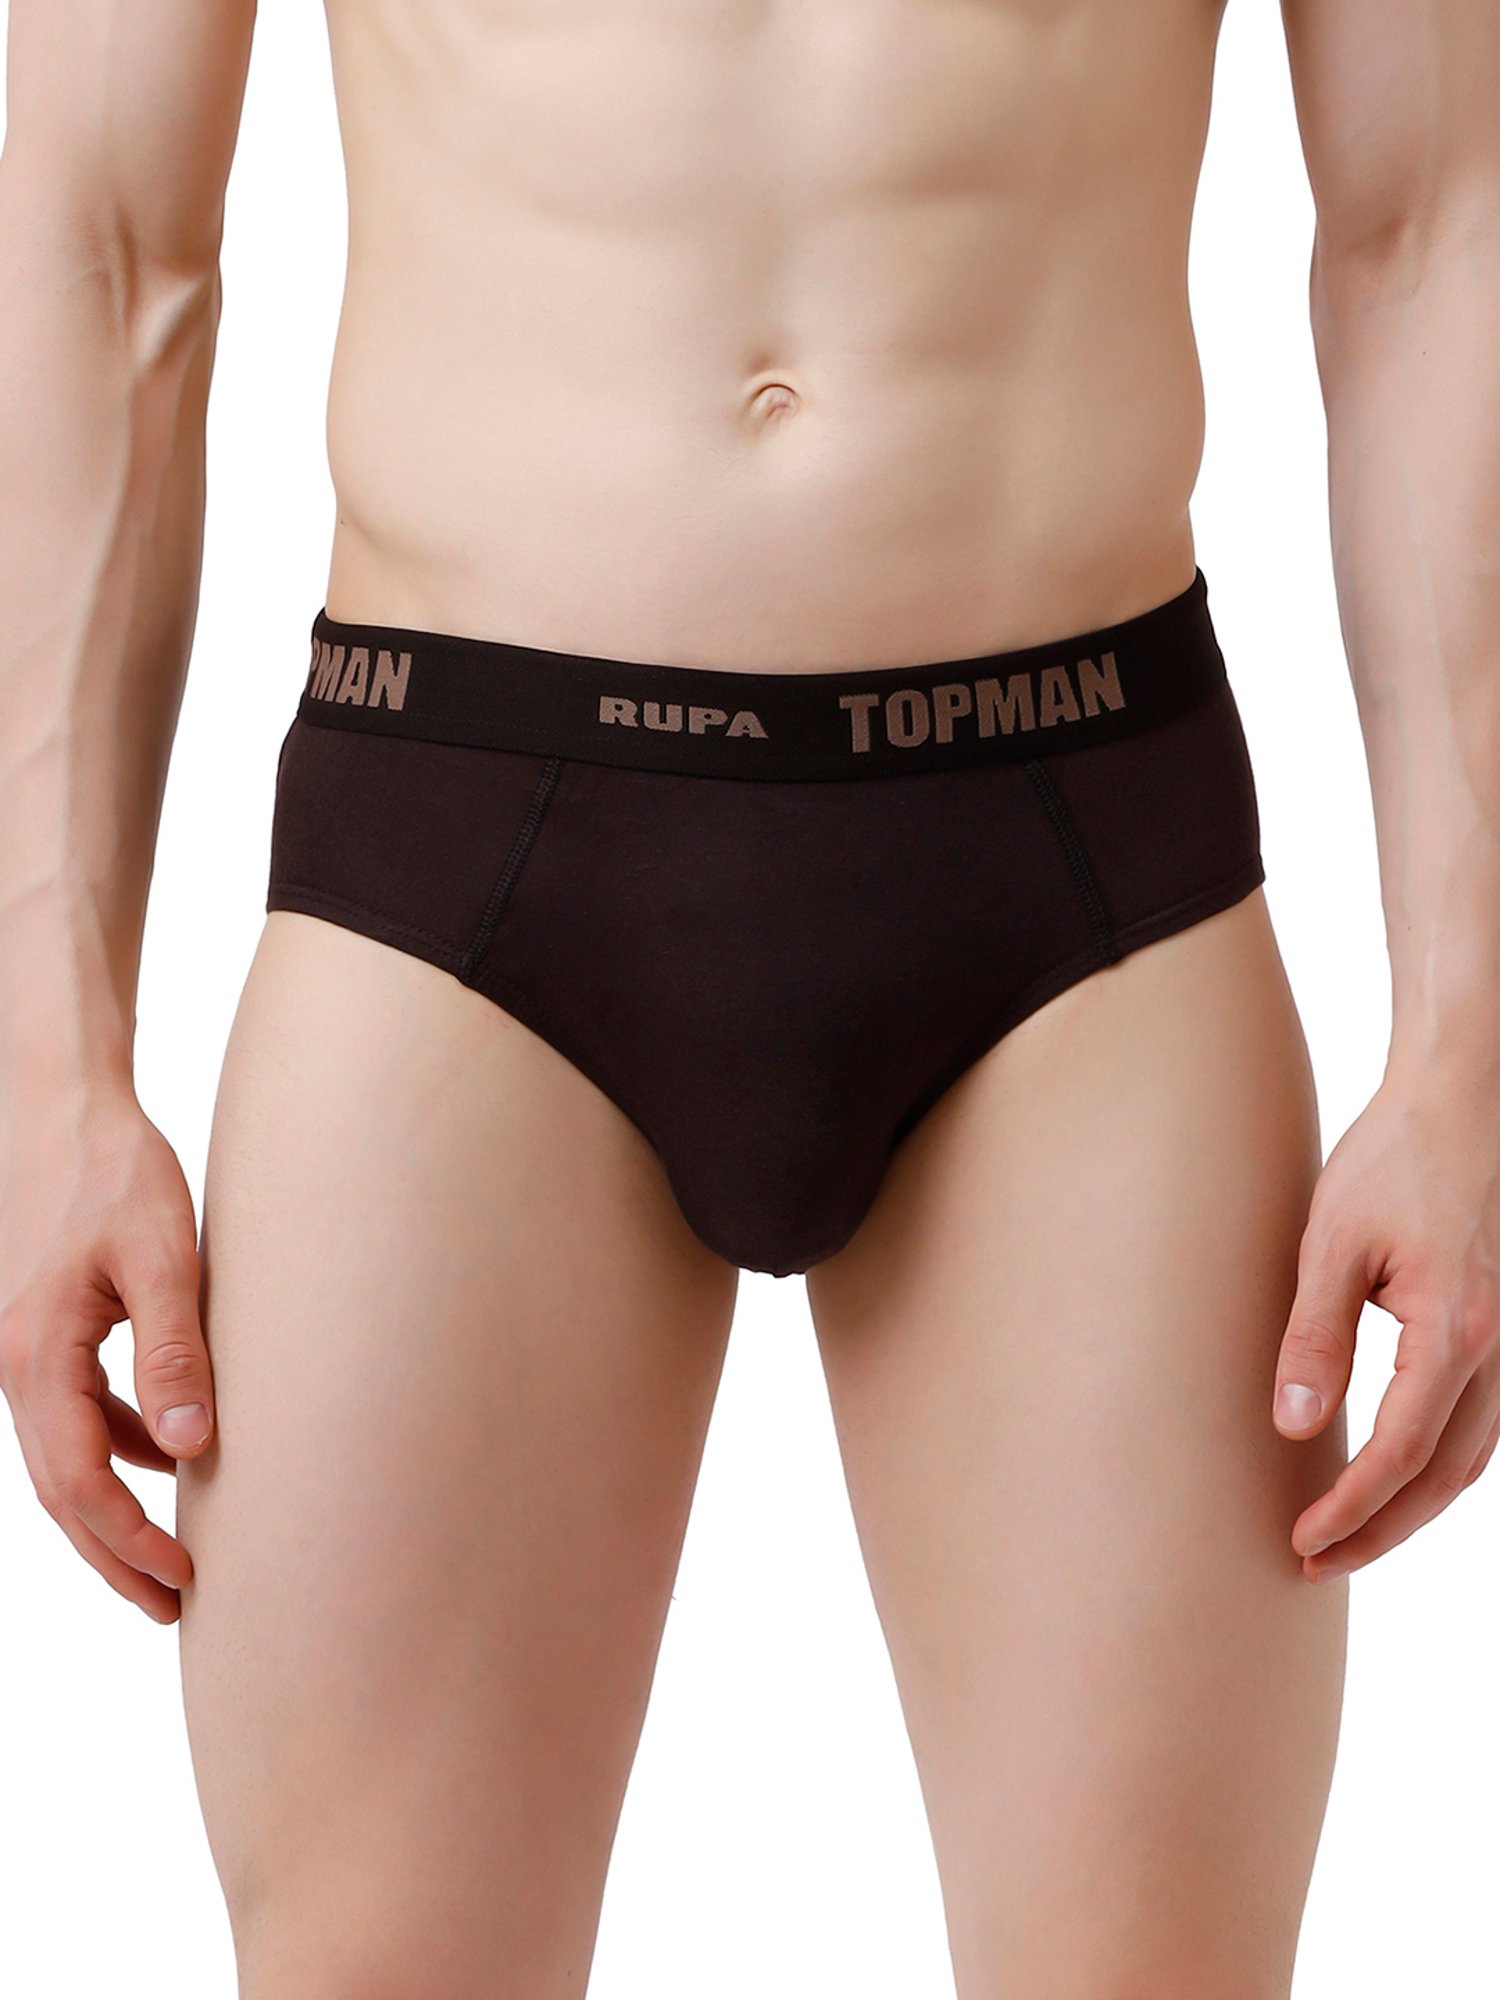 Buy Rupa Topman Assorted Colours Underwear for Men - Pack of 4 (95